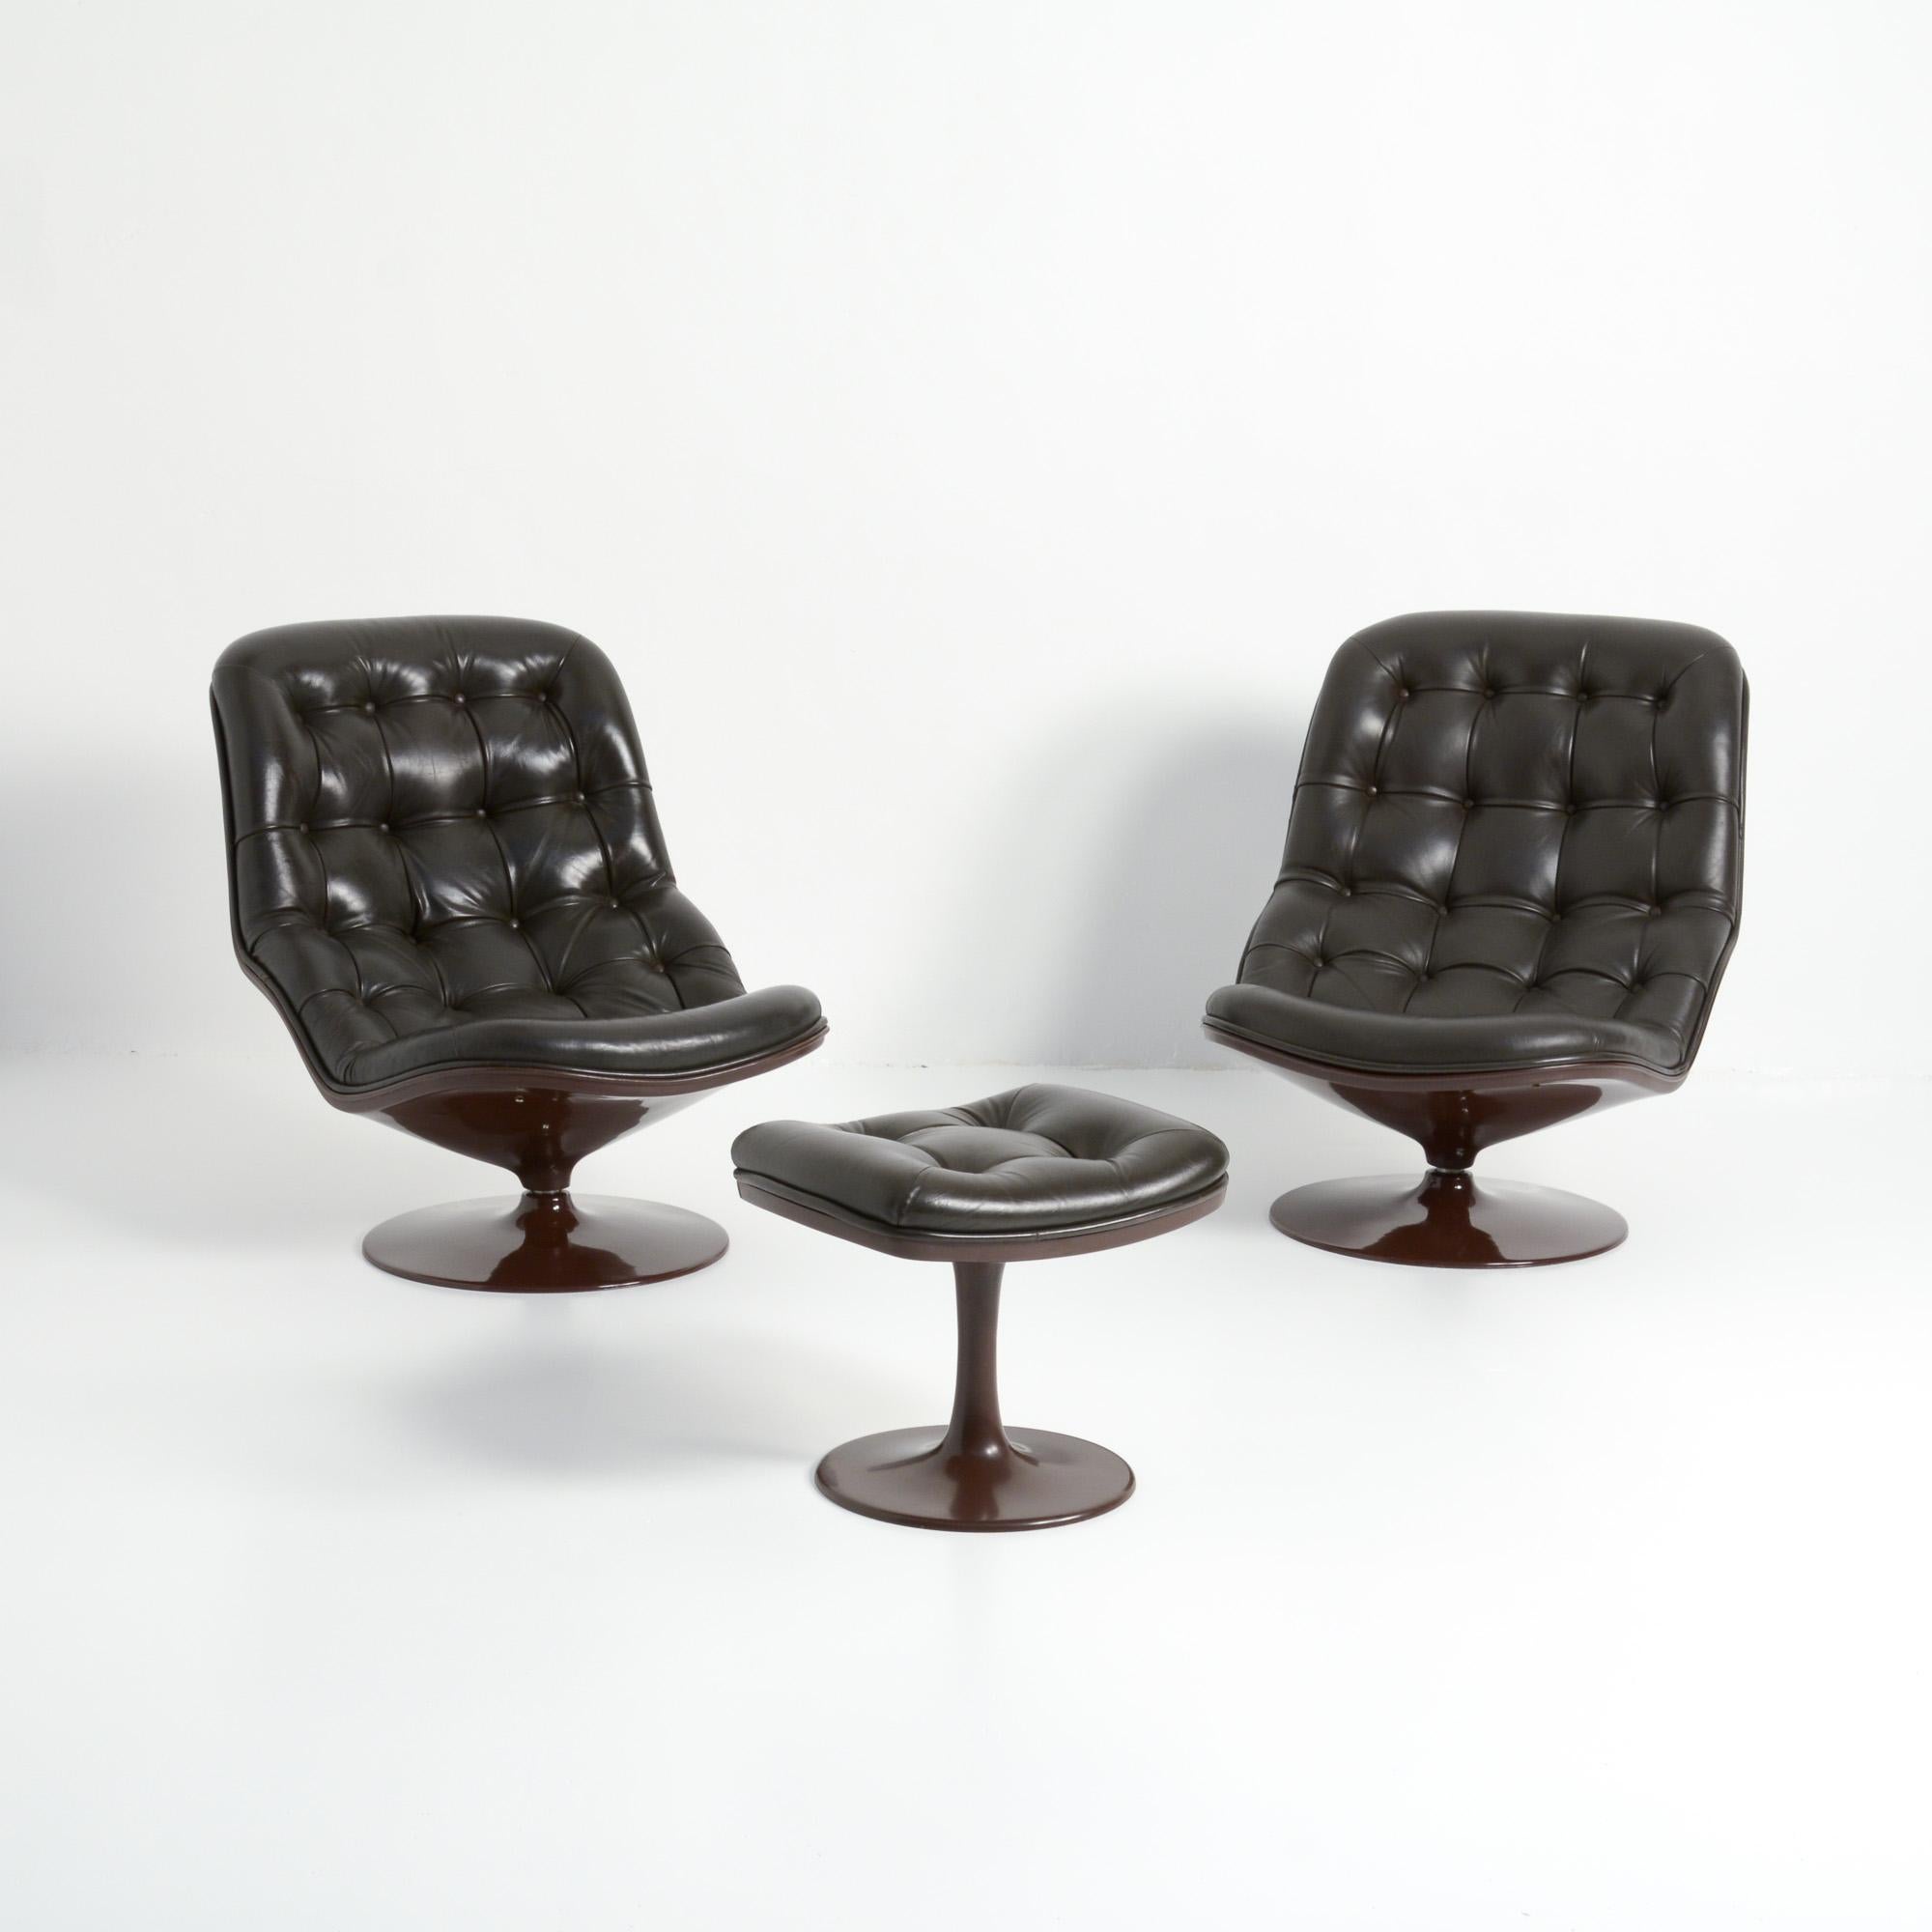 The Shelby lounge chair was designed by Georges van Rijck for Beaufort. We offer you a set of 2 lounge chairs and 1 ottoman, made of chocolate brown polyester and dark brown leather.
The chairs can swivel and have a tilt function. This set of warm